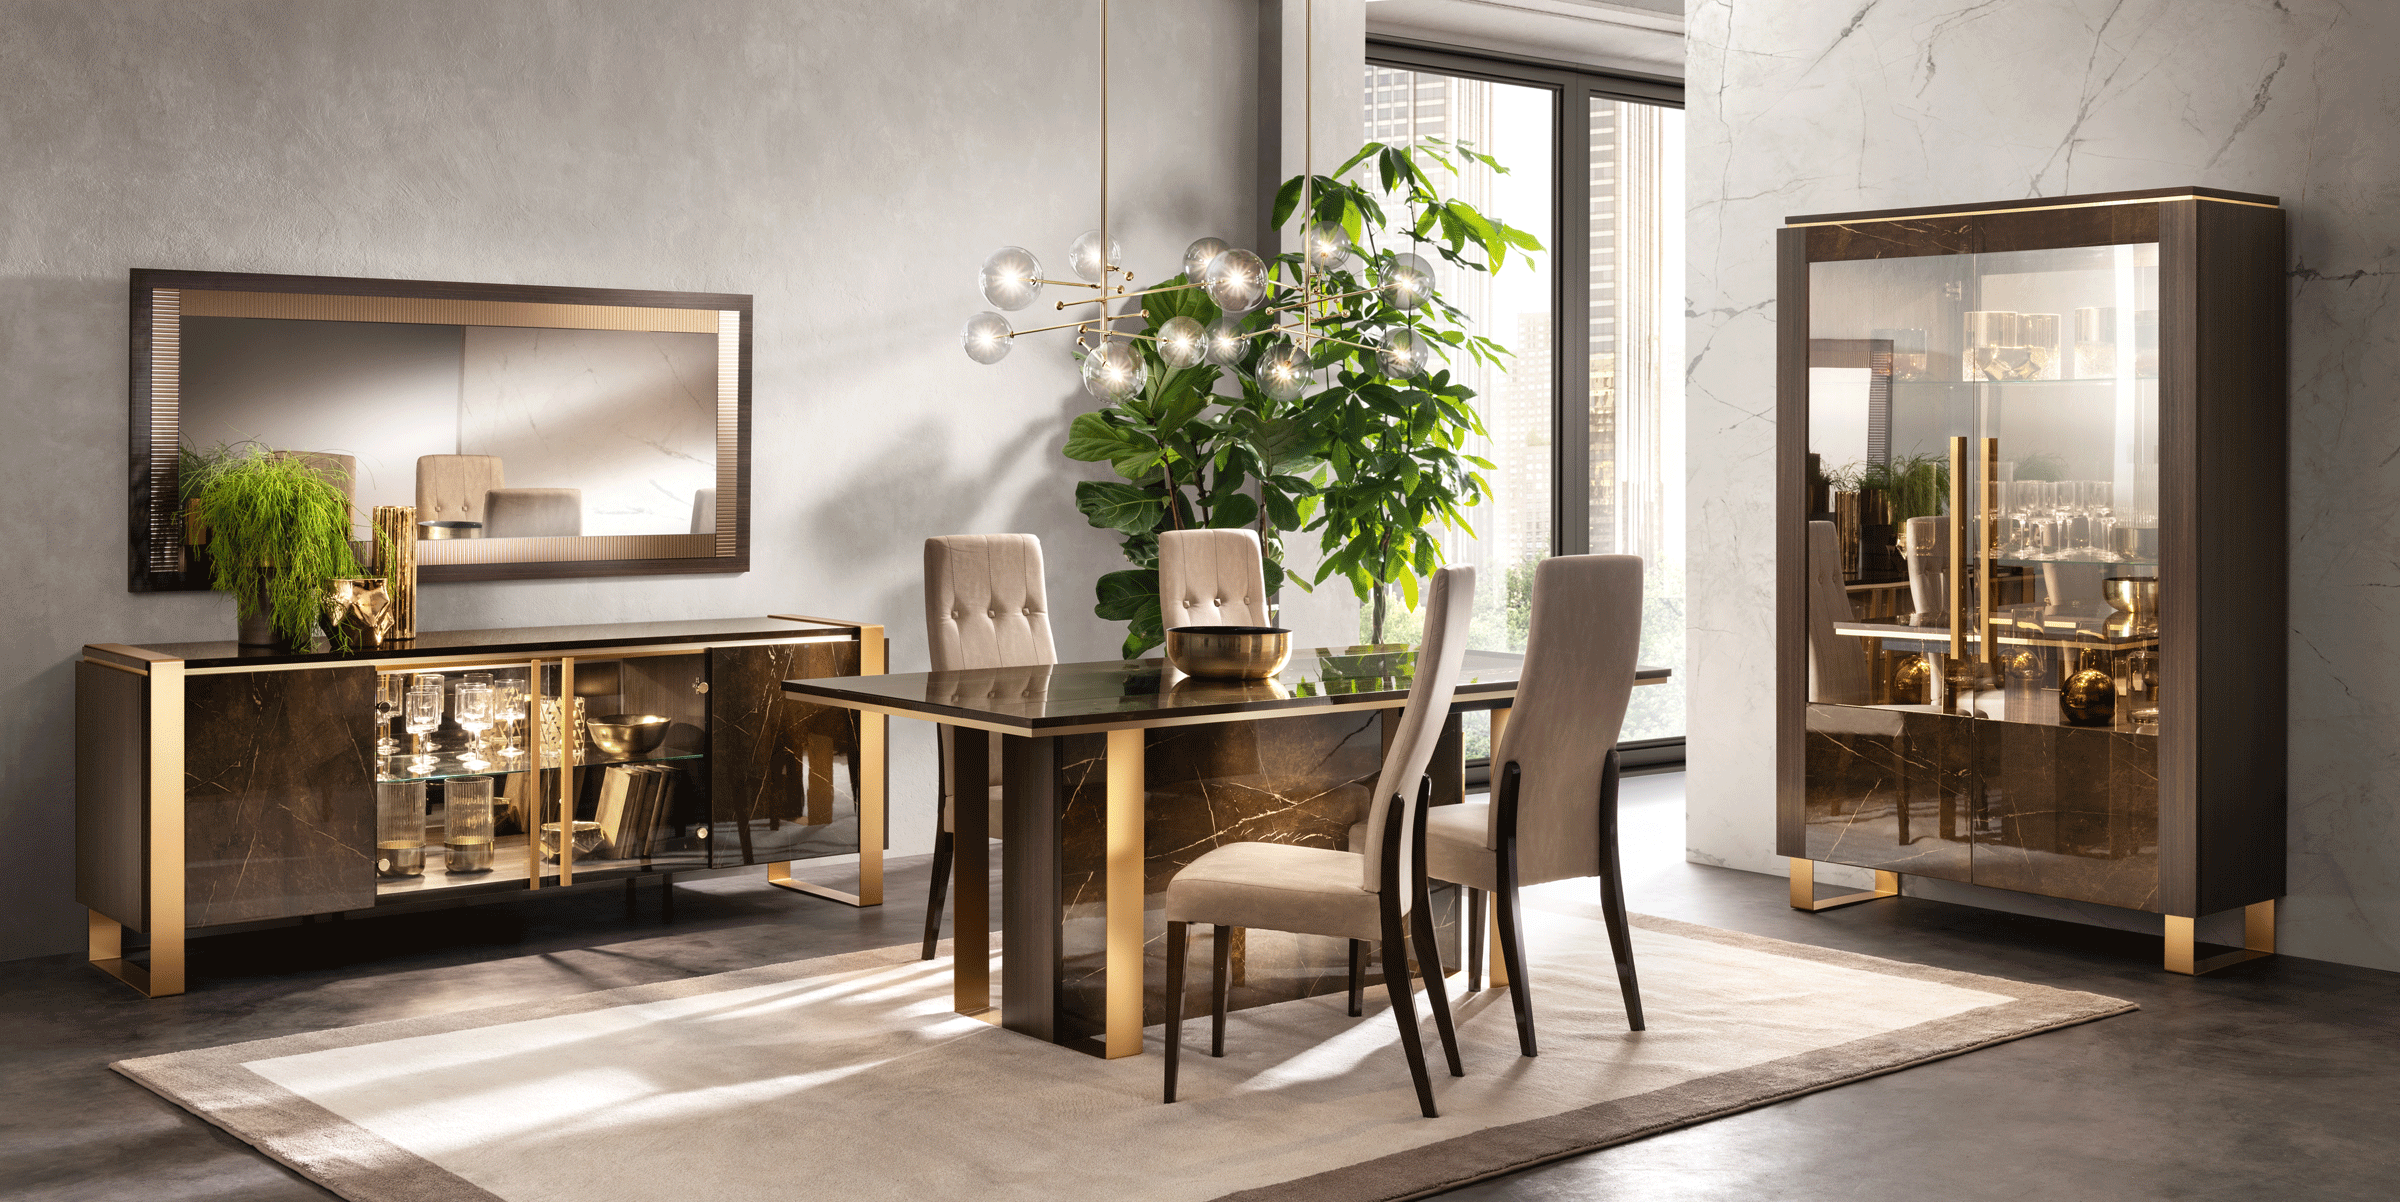 Dining Room Furniture China Cabinets and Buffets Essenza Dining by Arredoclassic, Italy Additional